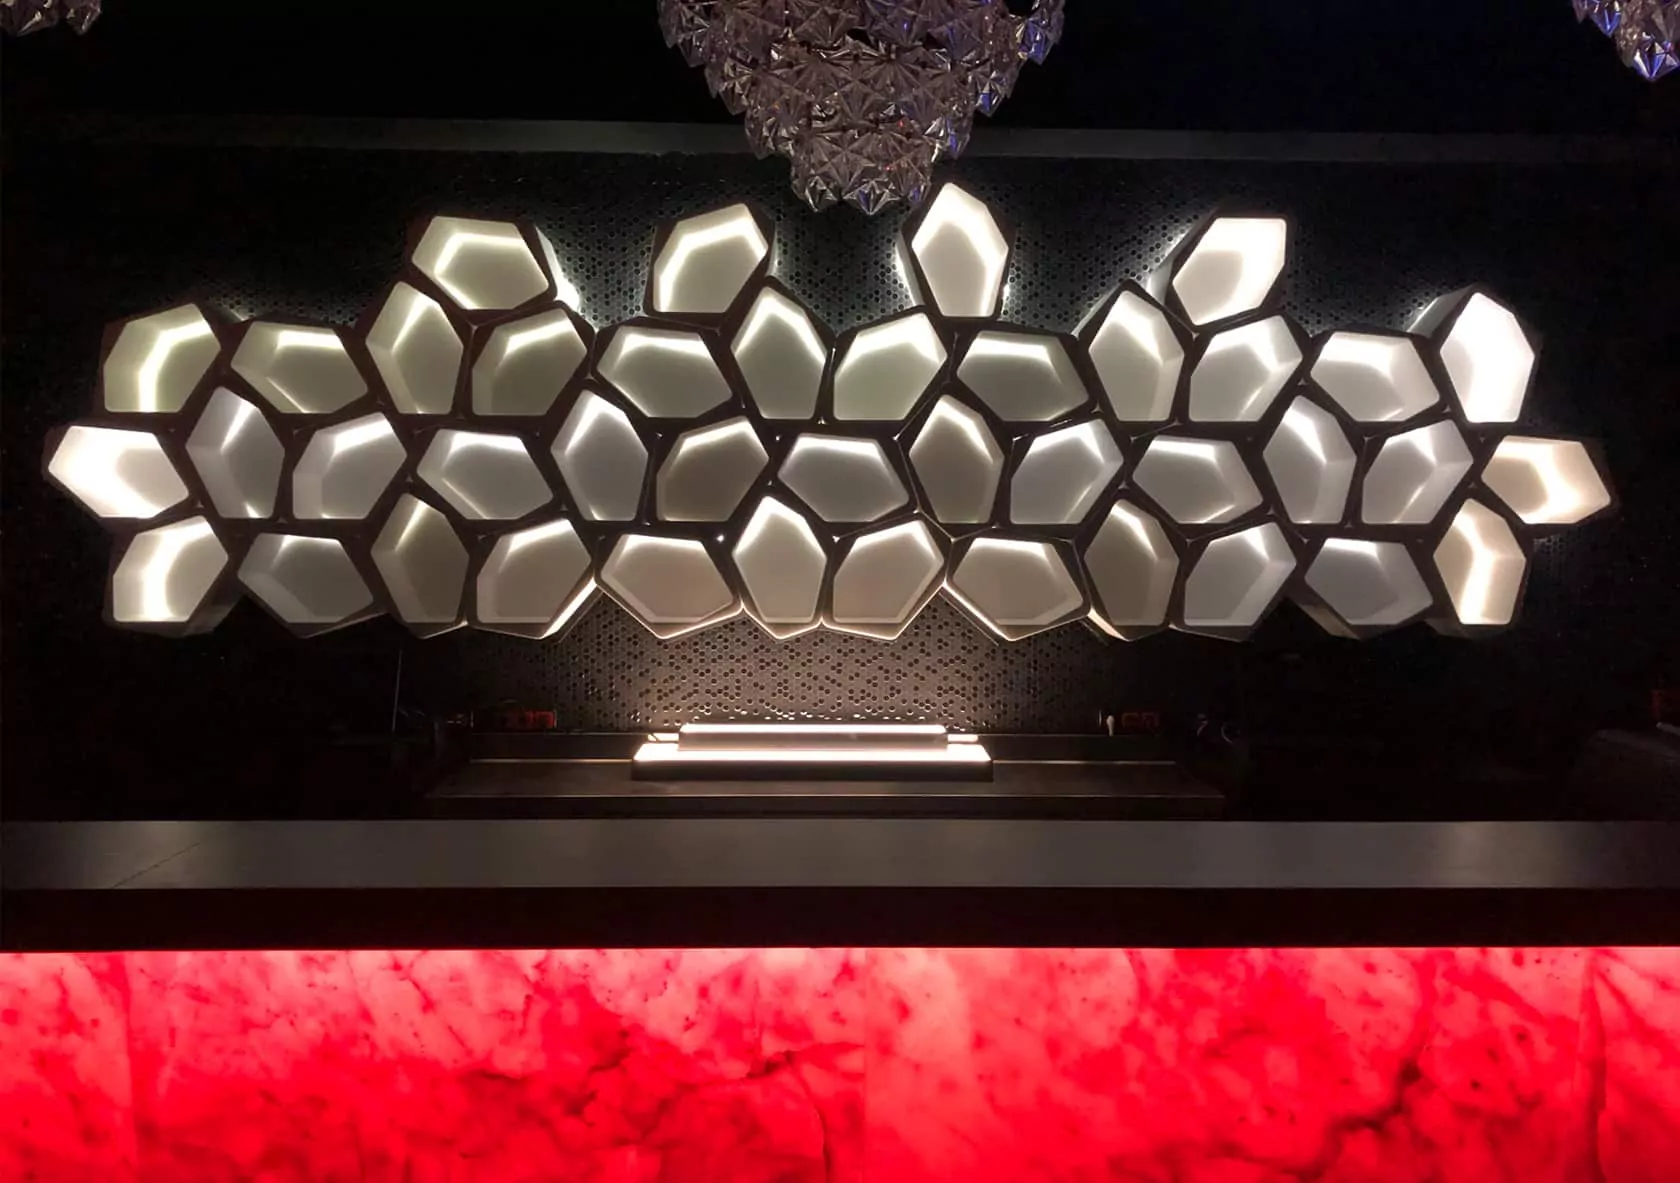 modular floating wall shelves with LED backlighting at the BCM club